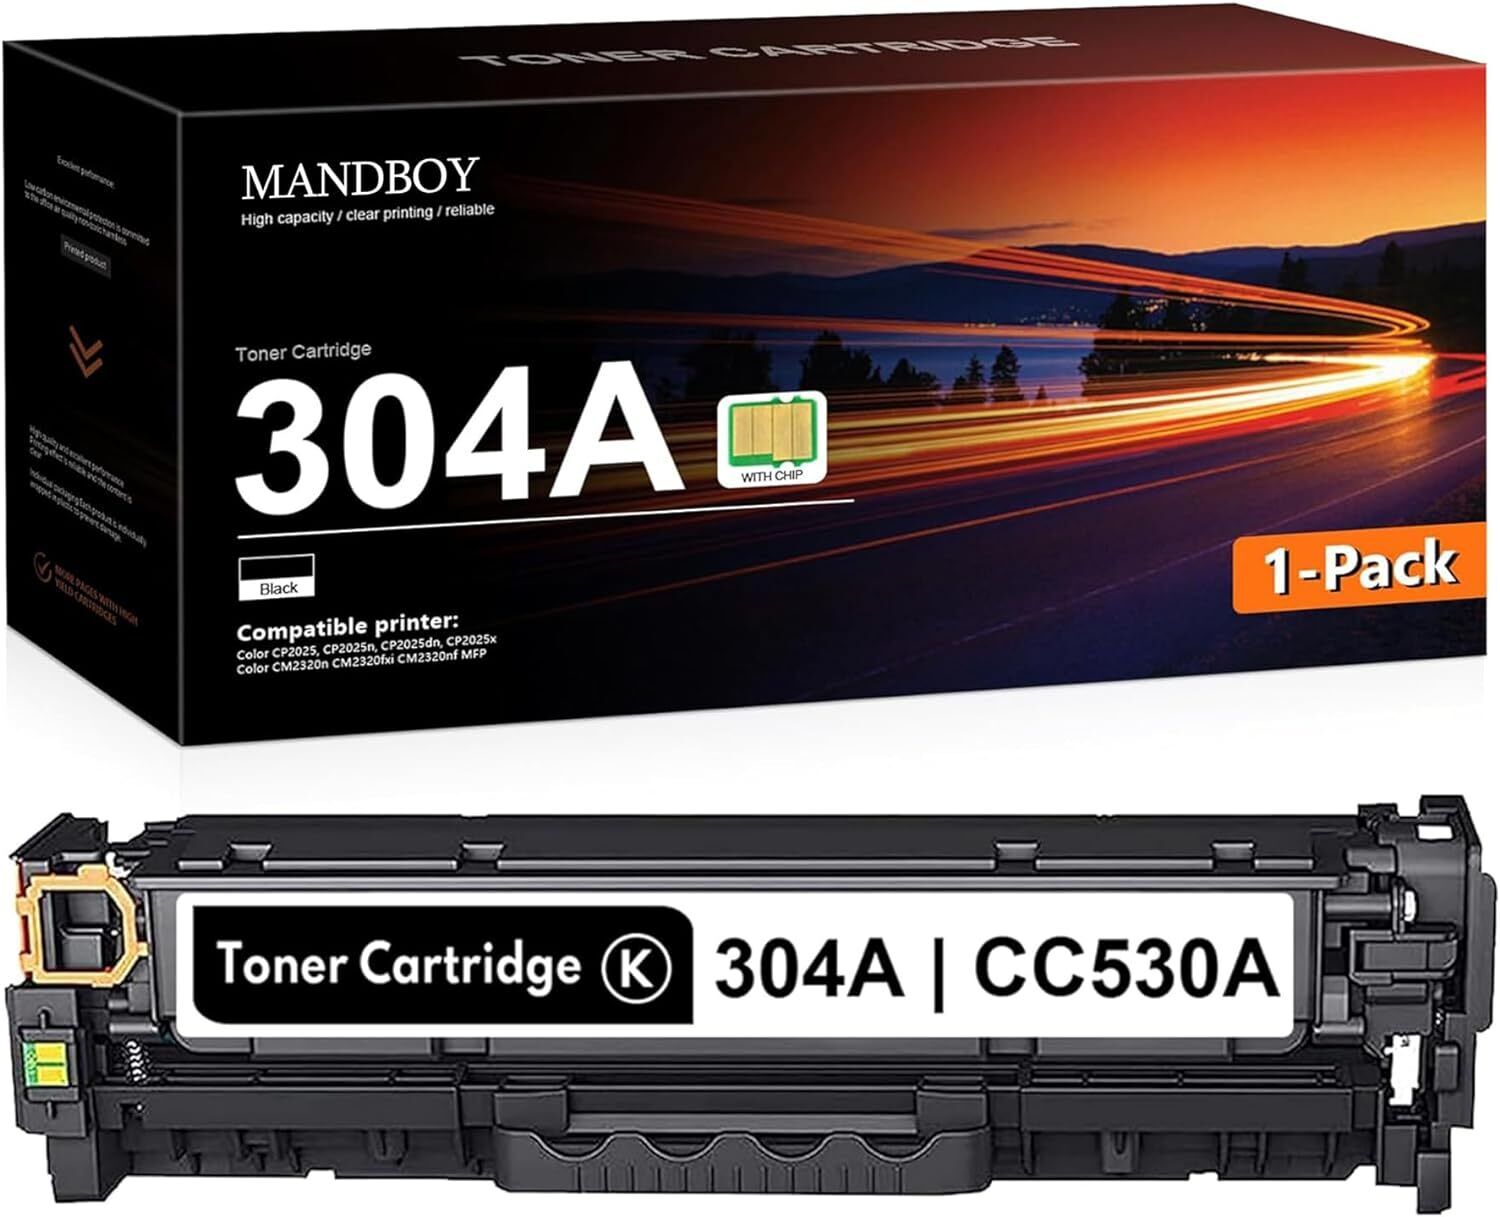 304A Black Toner Cartridge CC530A Replacement for HP CP2025 (High-Yield)